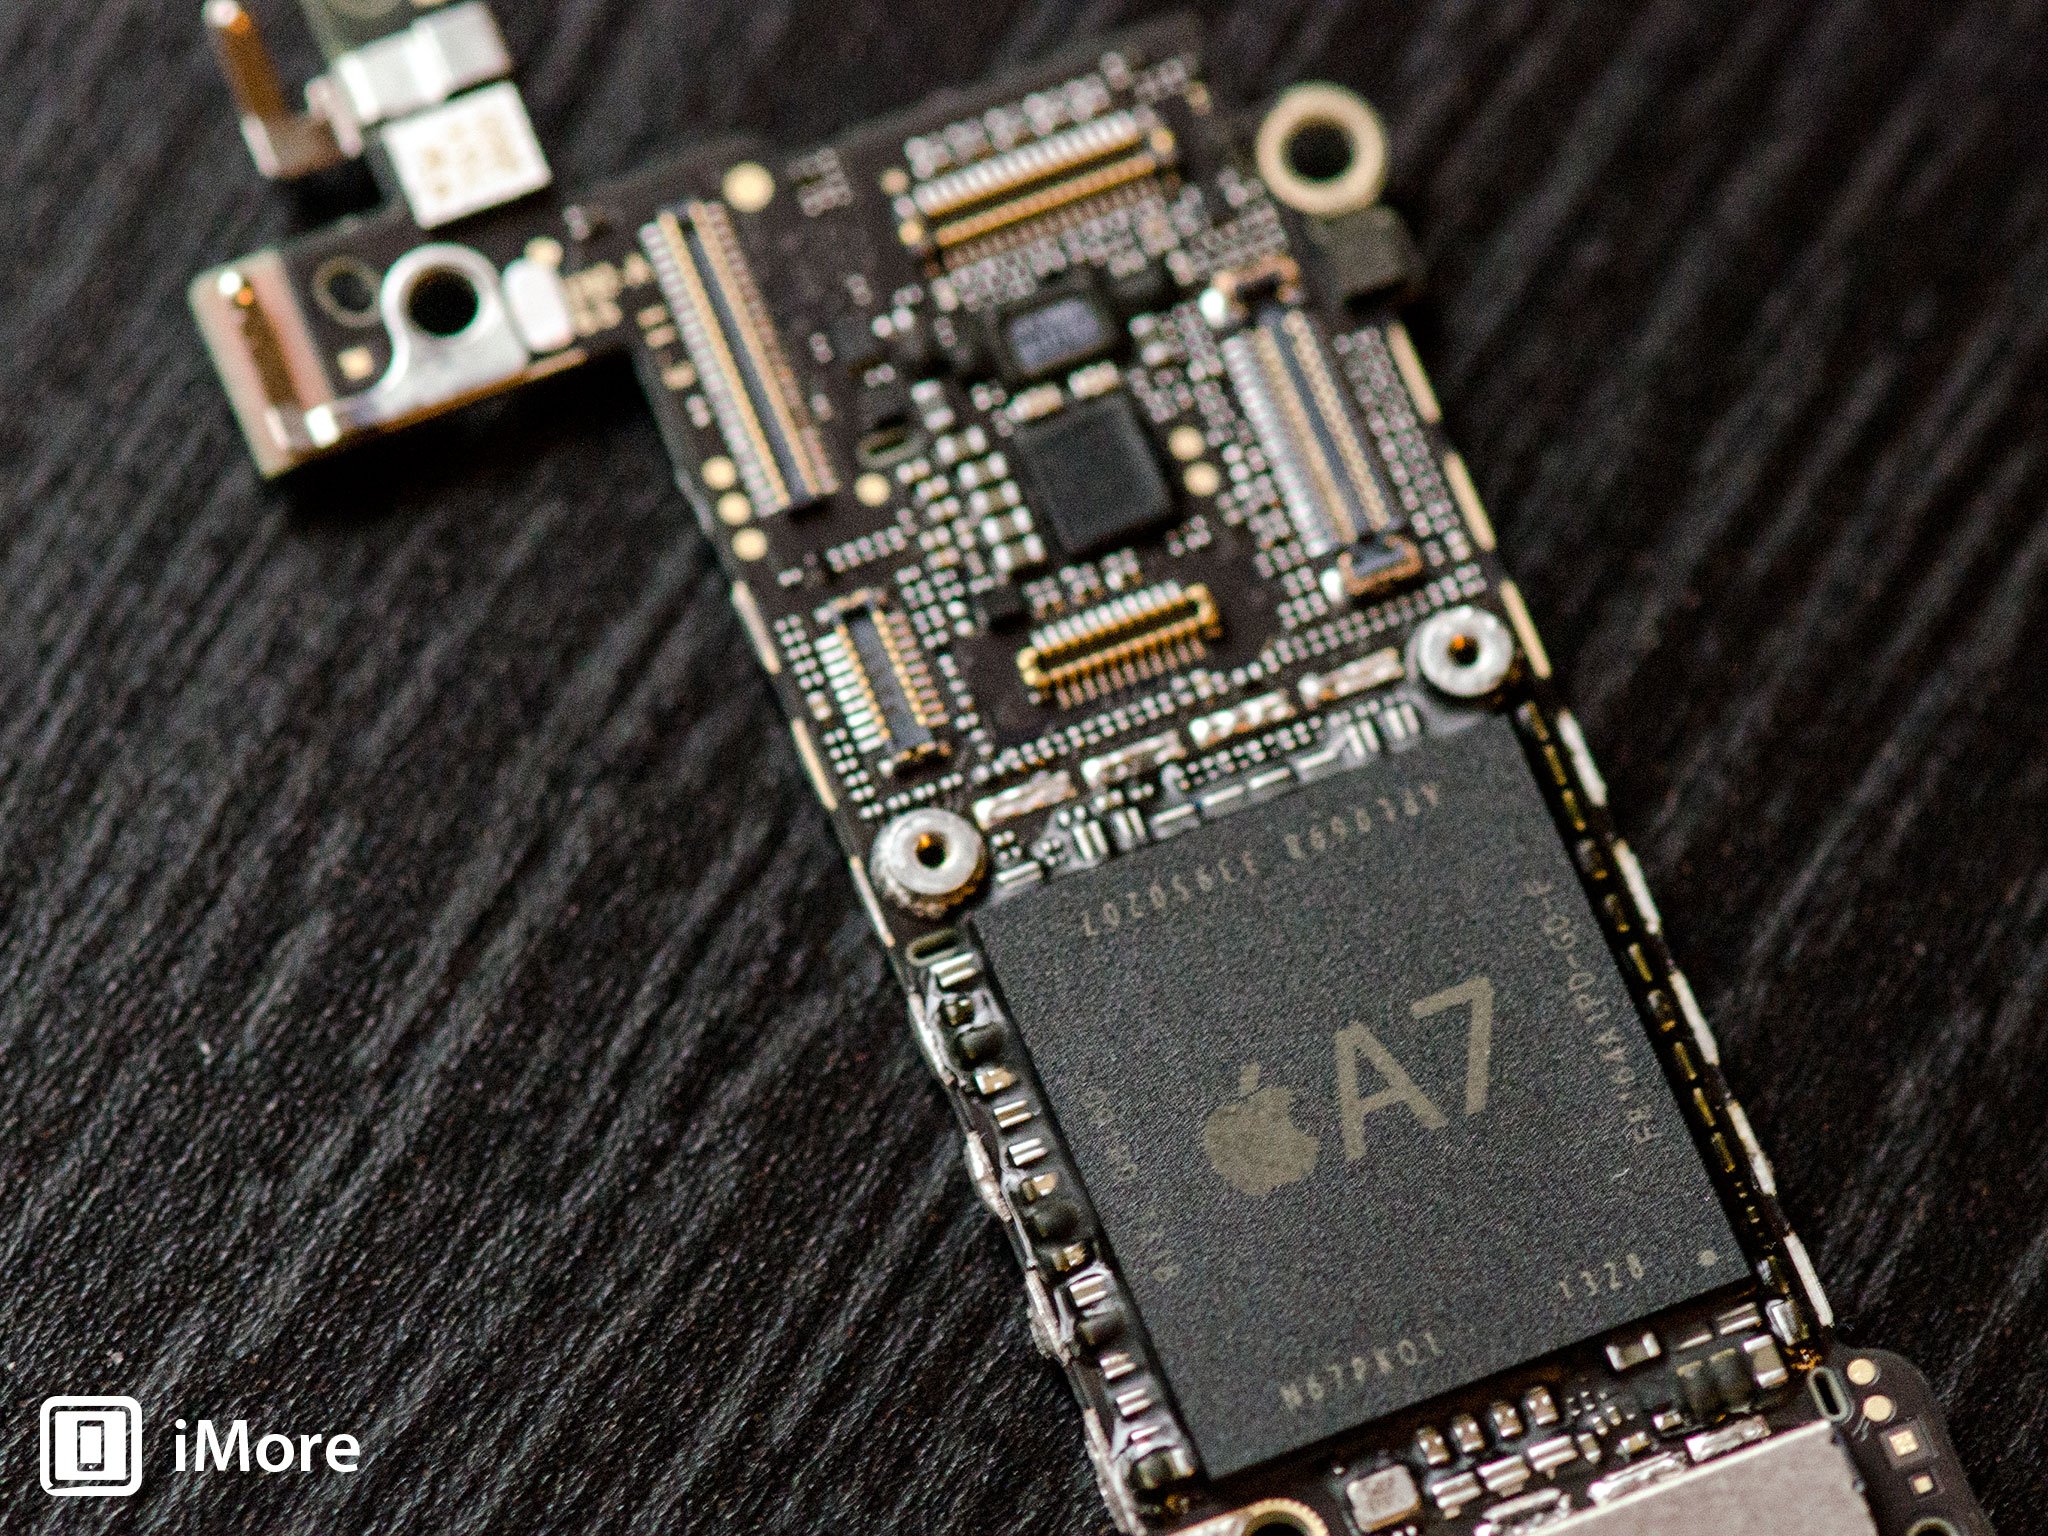 Top part of the iPhone 5s logic board